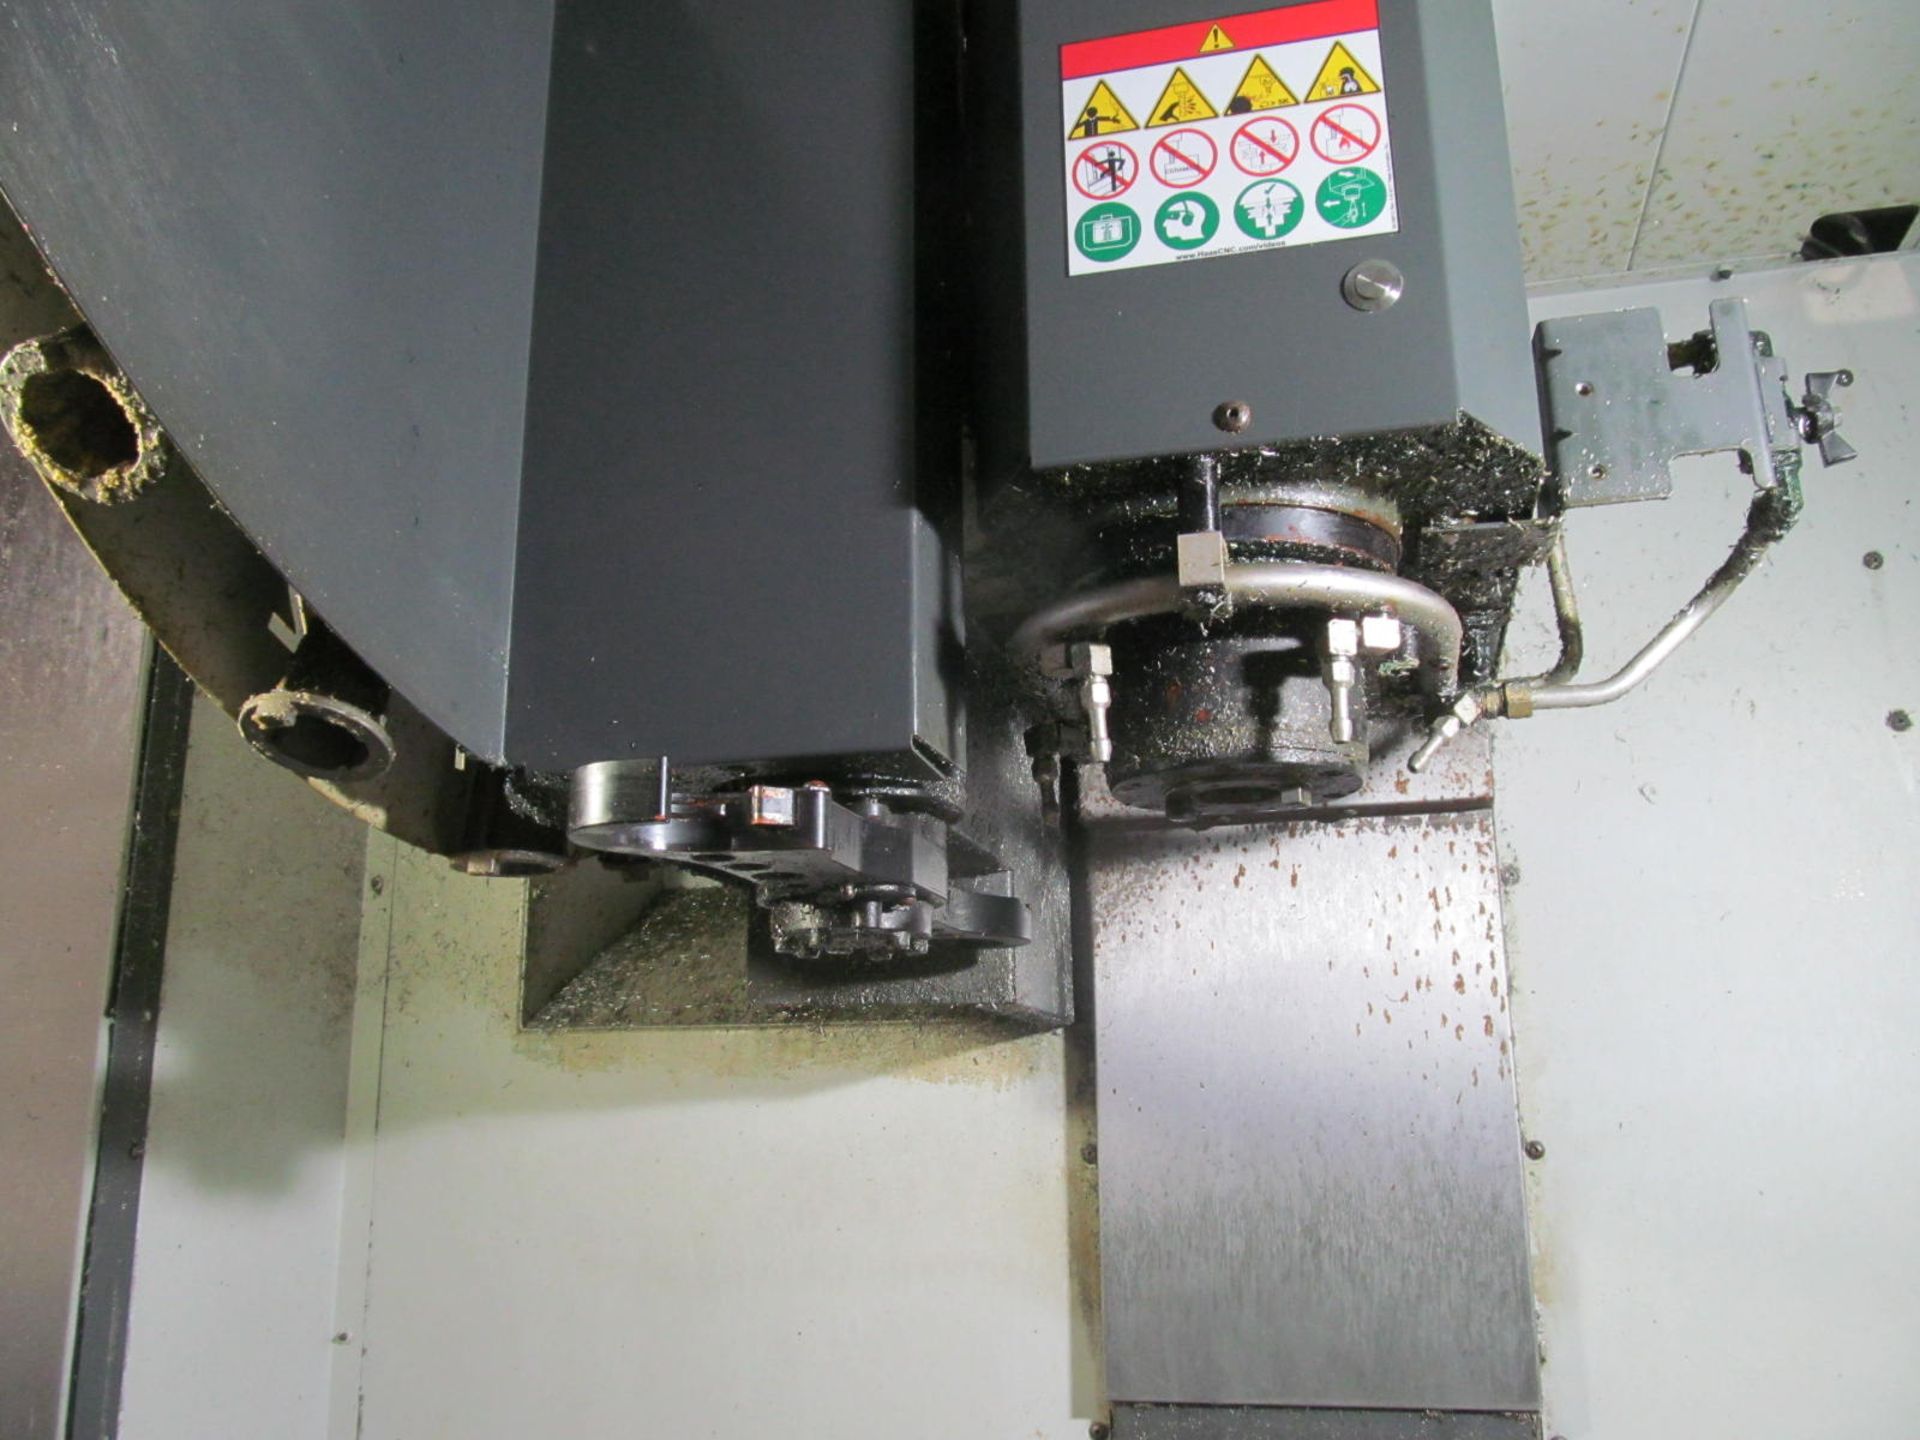 Haas DM-1 High-Performance CNC Drill/Mill Center - Image 4 of 7